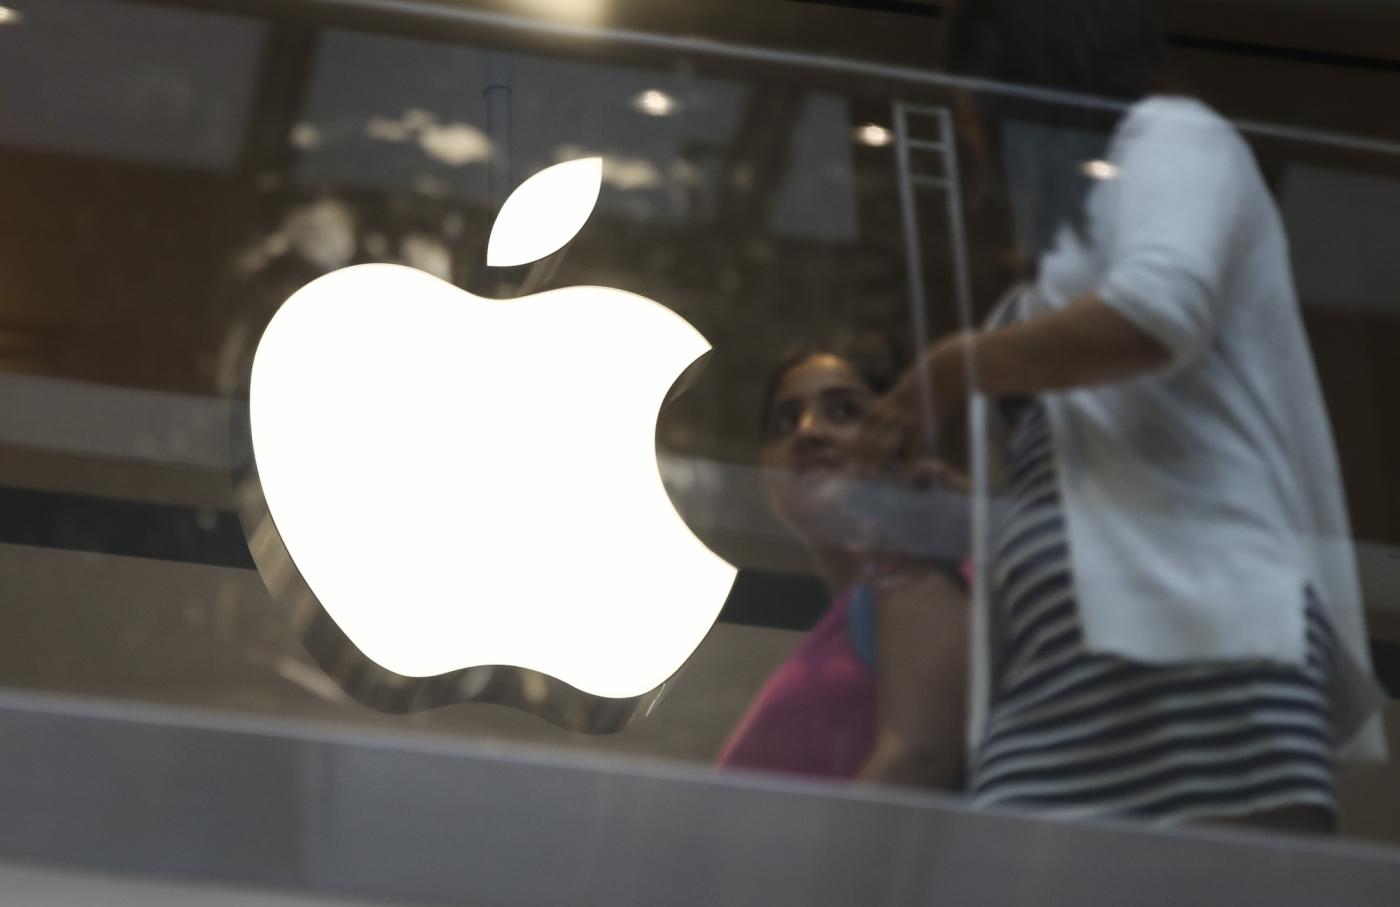 NEW YORK, Aug. 2, 2018 (Xinhua) -- People walk past an Apple store in New York, the United States, Aug. 2, 2018. U.S. tech giant Apple became the first American company that saw its market cap hit 1 trillion U.S. dollars in the U.S. history after its shares rose 2.8 percent to a session high of 207.05 dollars around midday trading on Thursday. (Xinhua/Wang Ying/IANS) by .